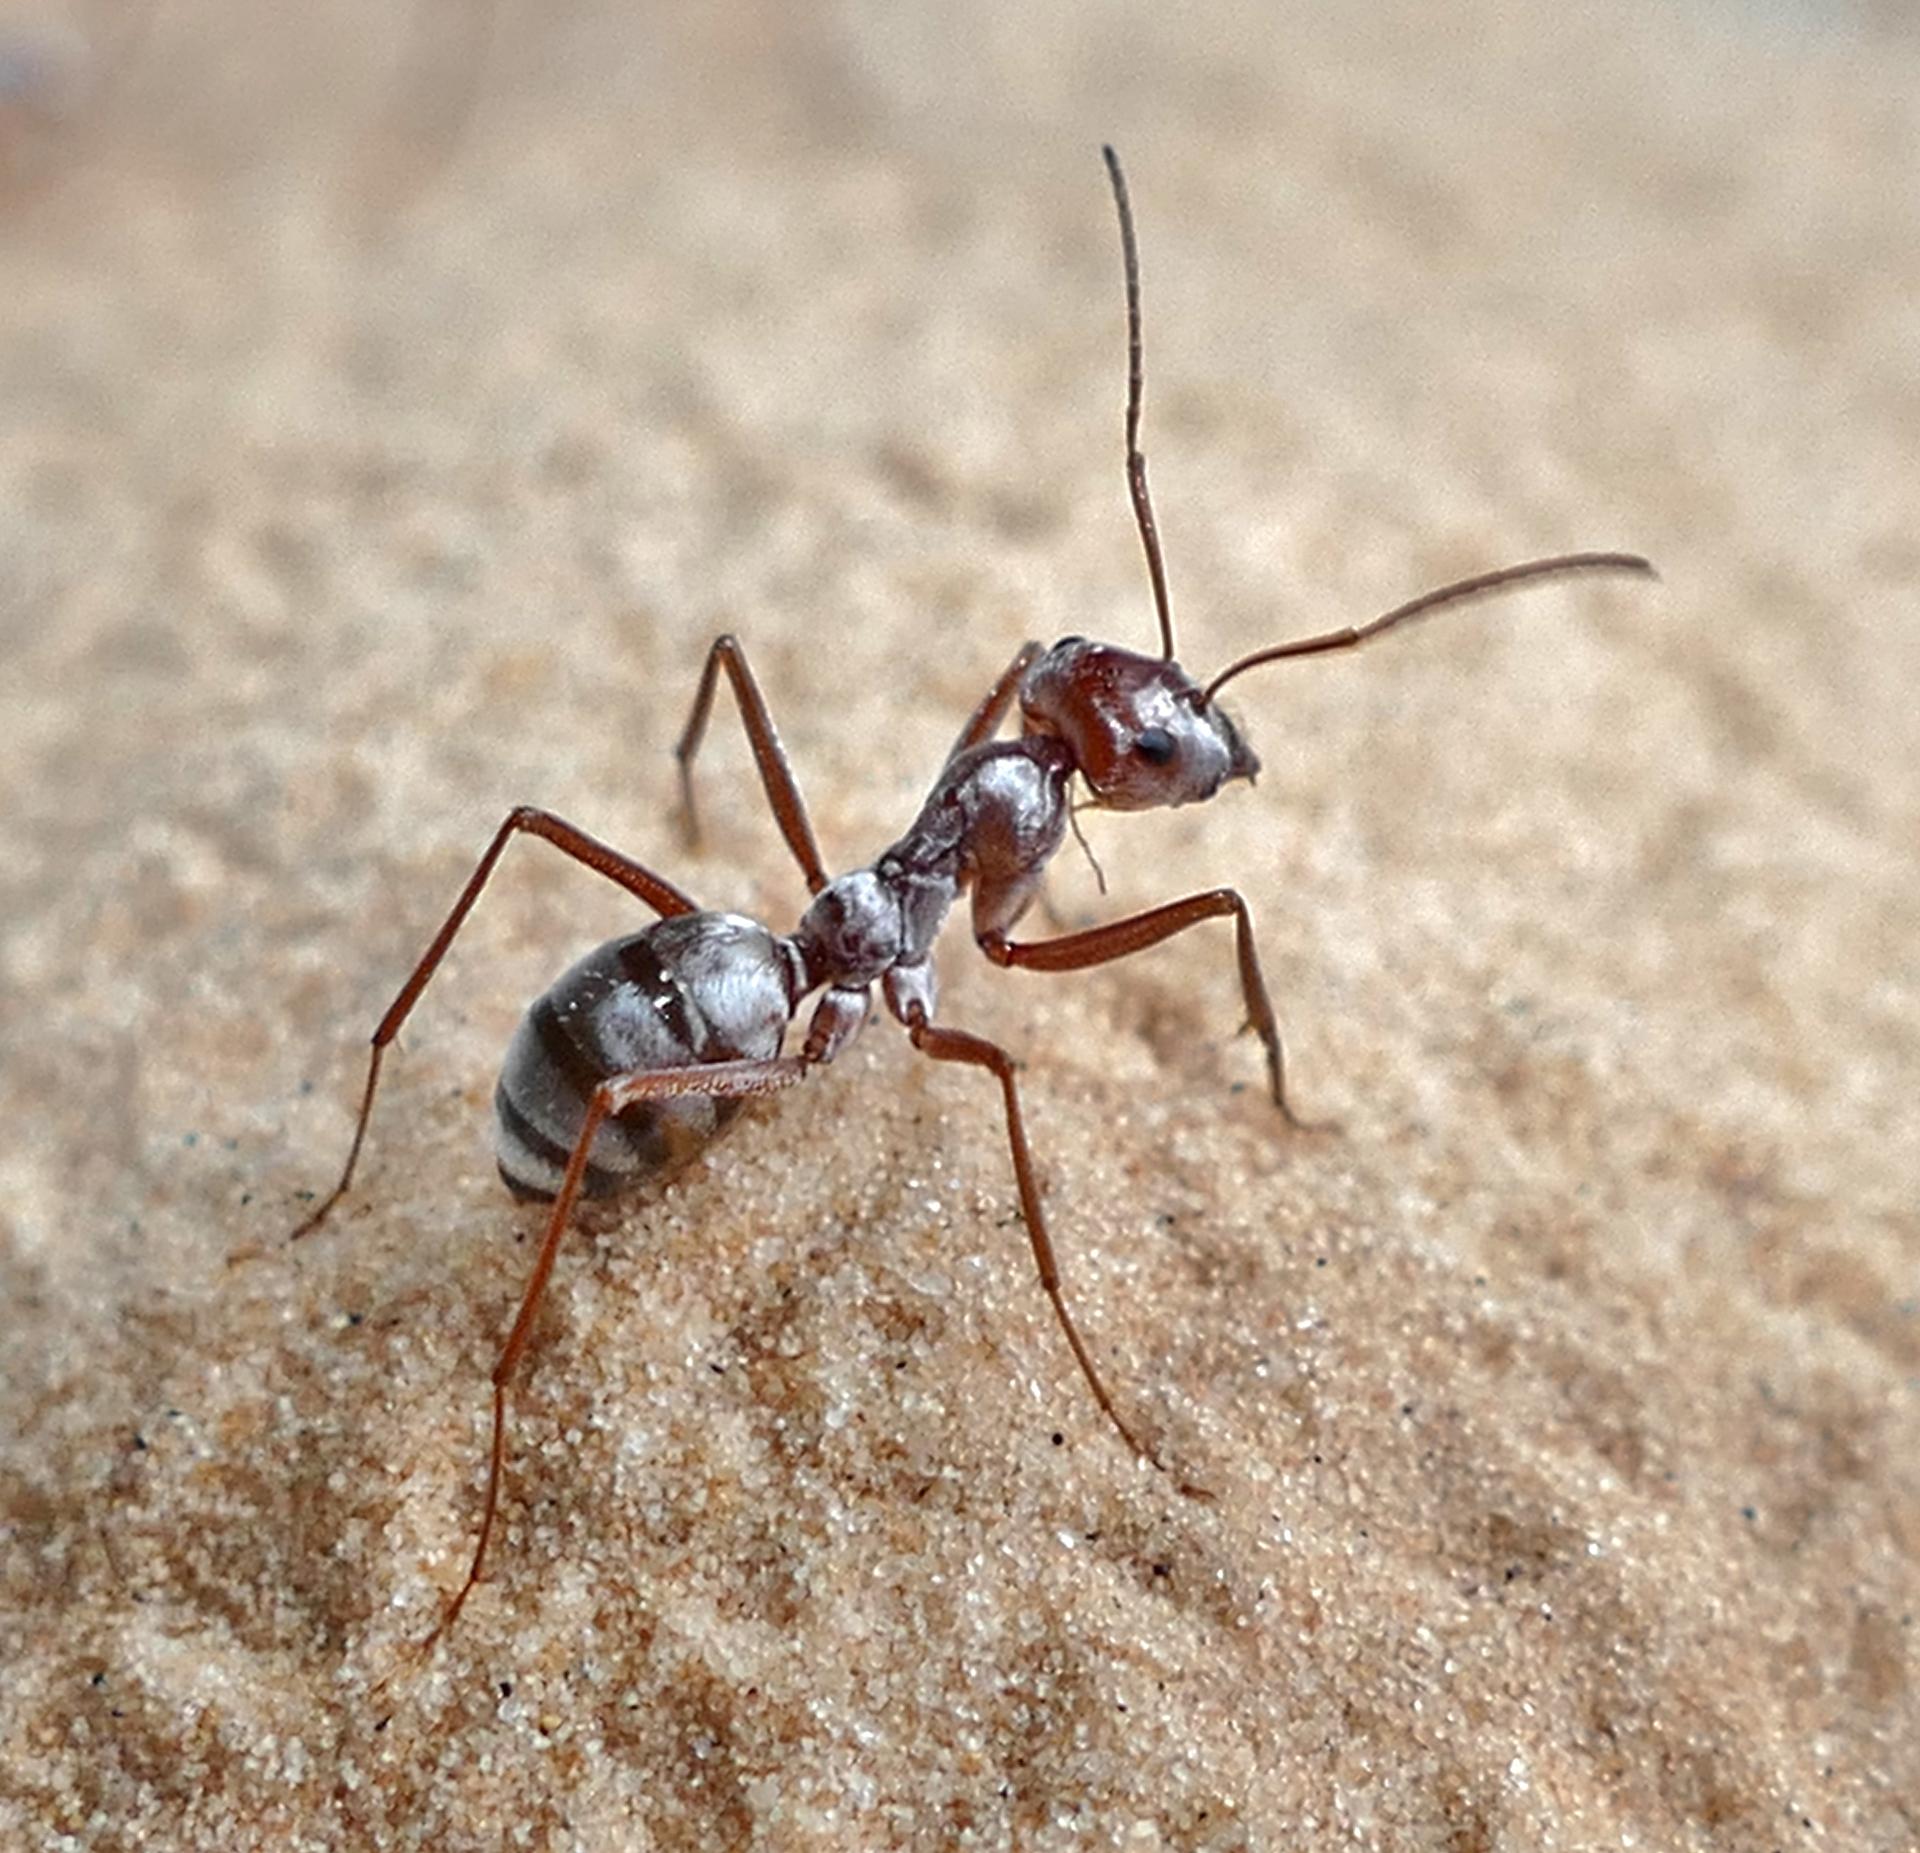 Up close image of ant with 6 legs